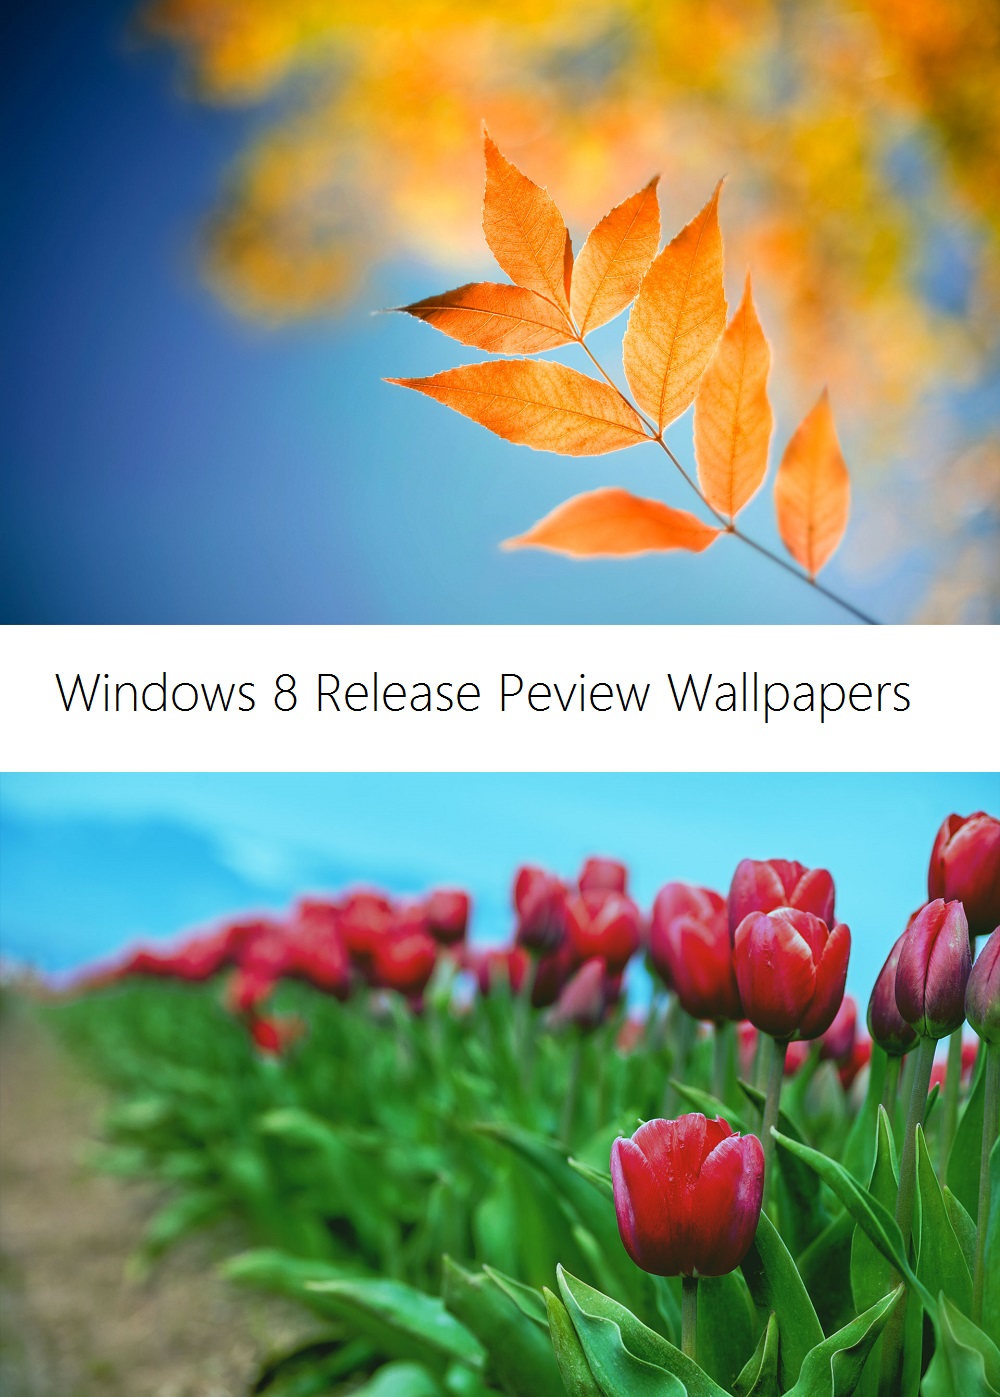 Windows 8 Release Preview Wallpapers